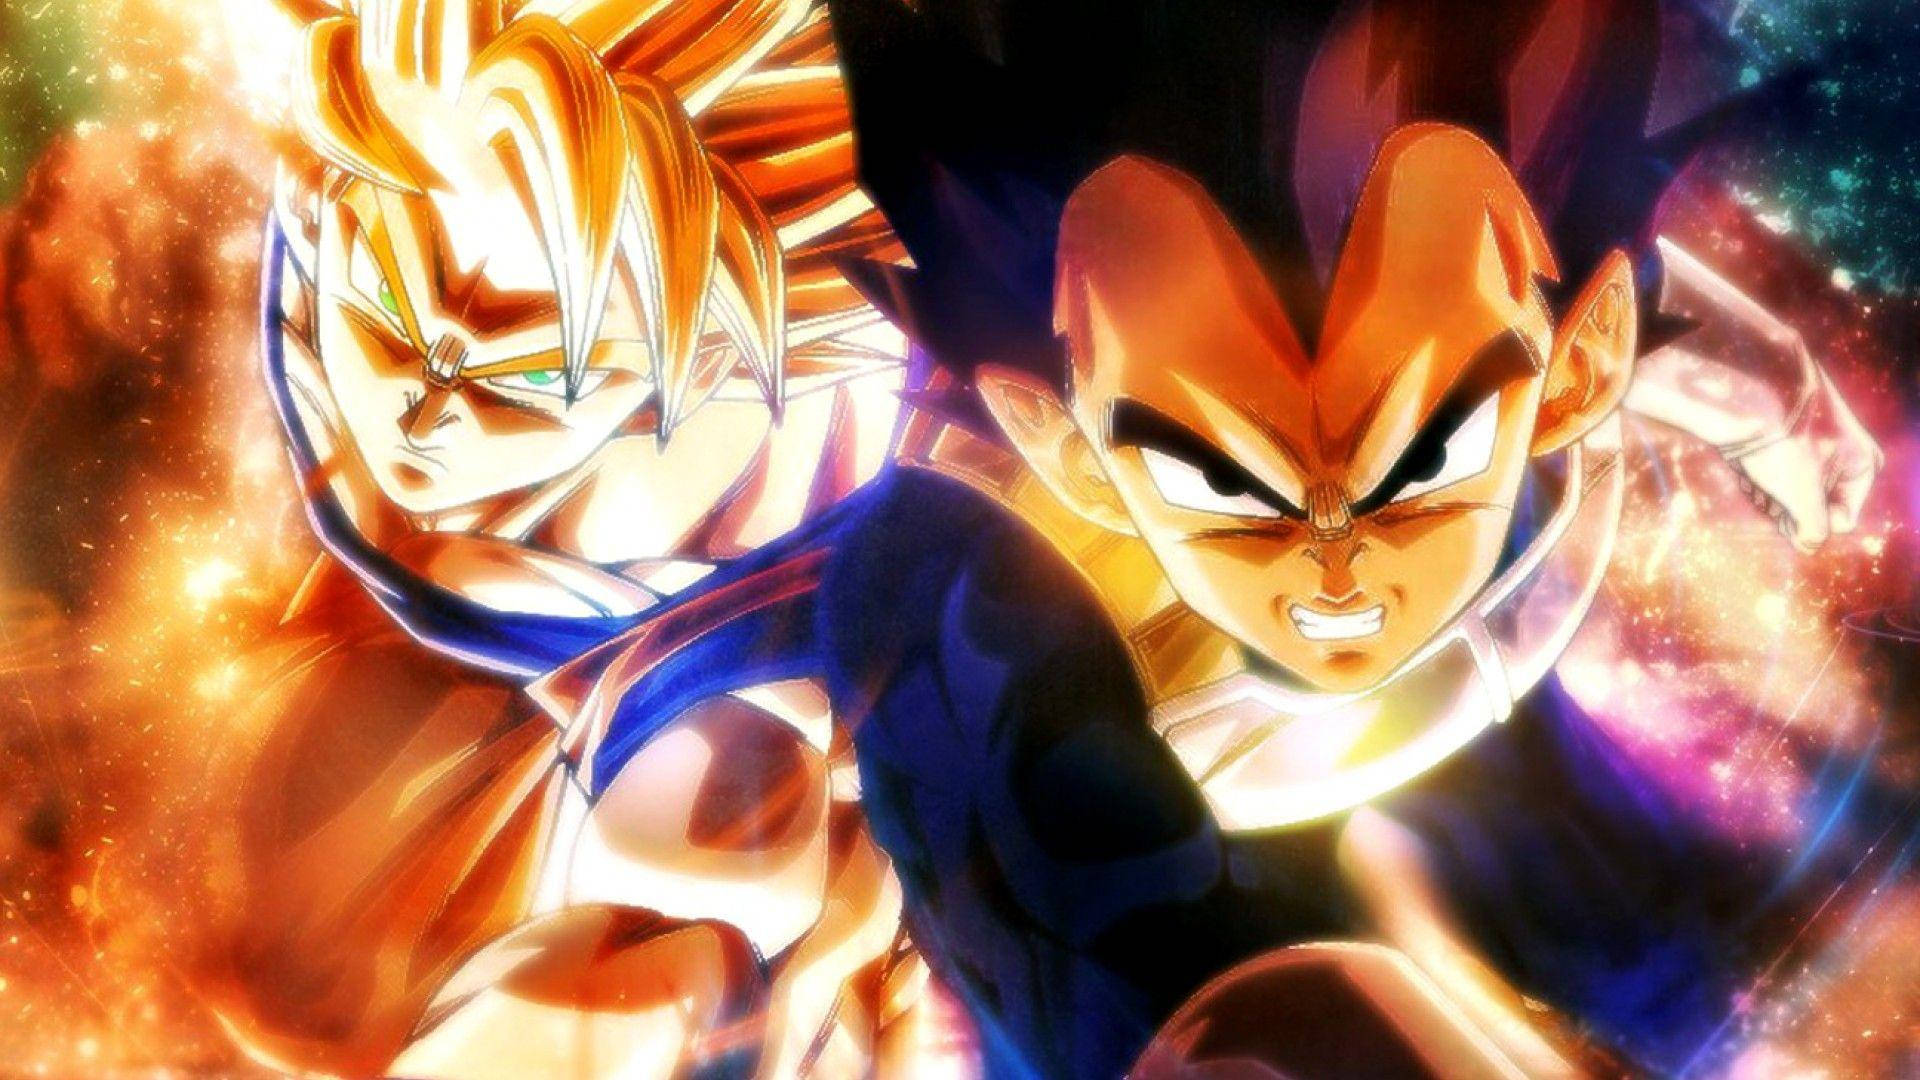 Get Ready to Unleash the Power of Goku in Dragon Ball Super Wallpaper